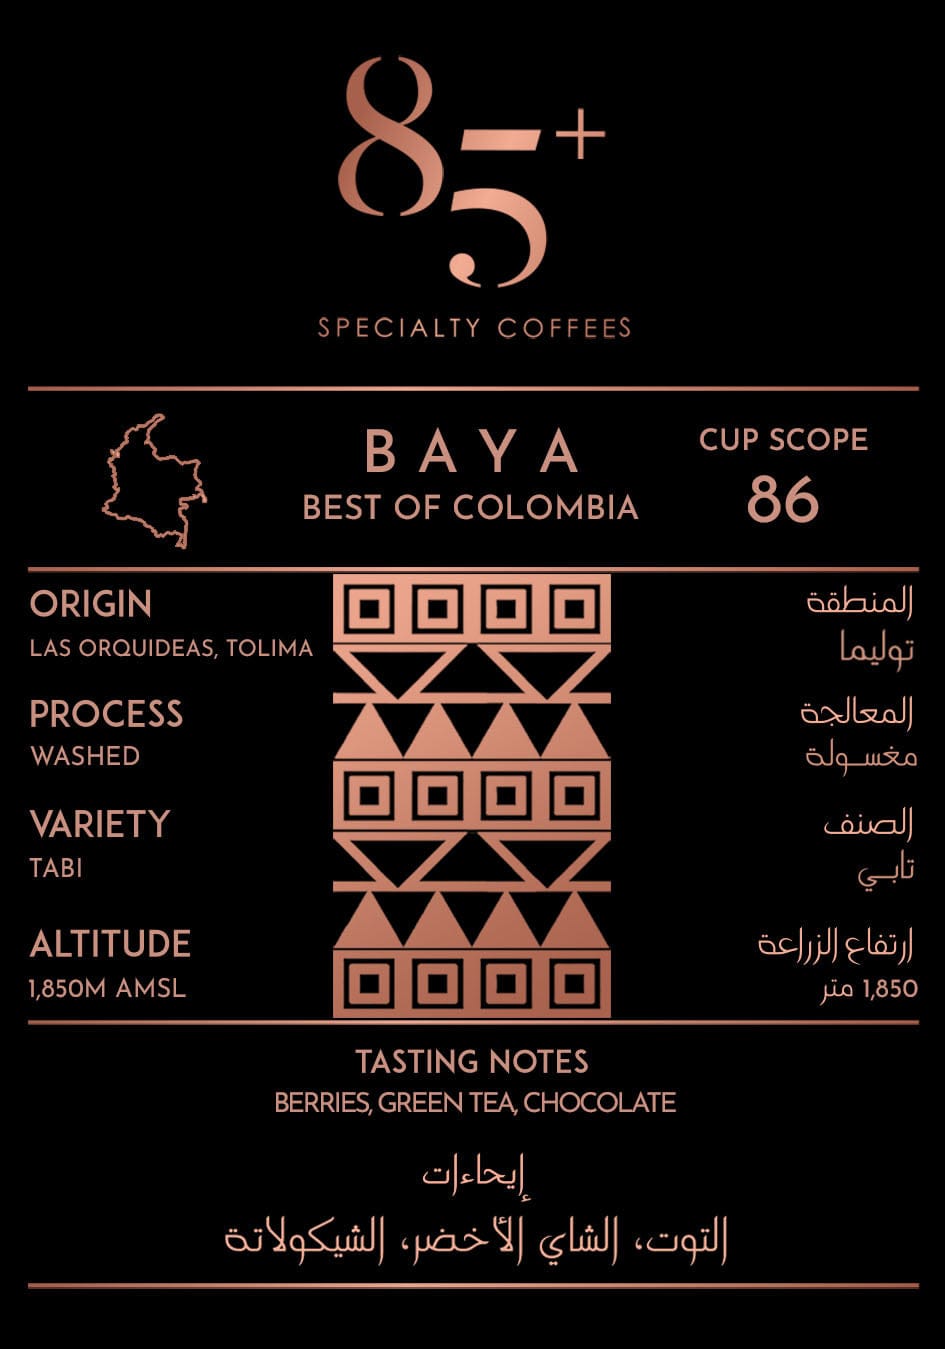 COLOMBIA, BAYA | Cup Score 86